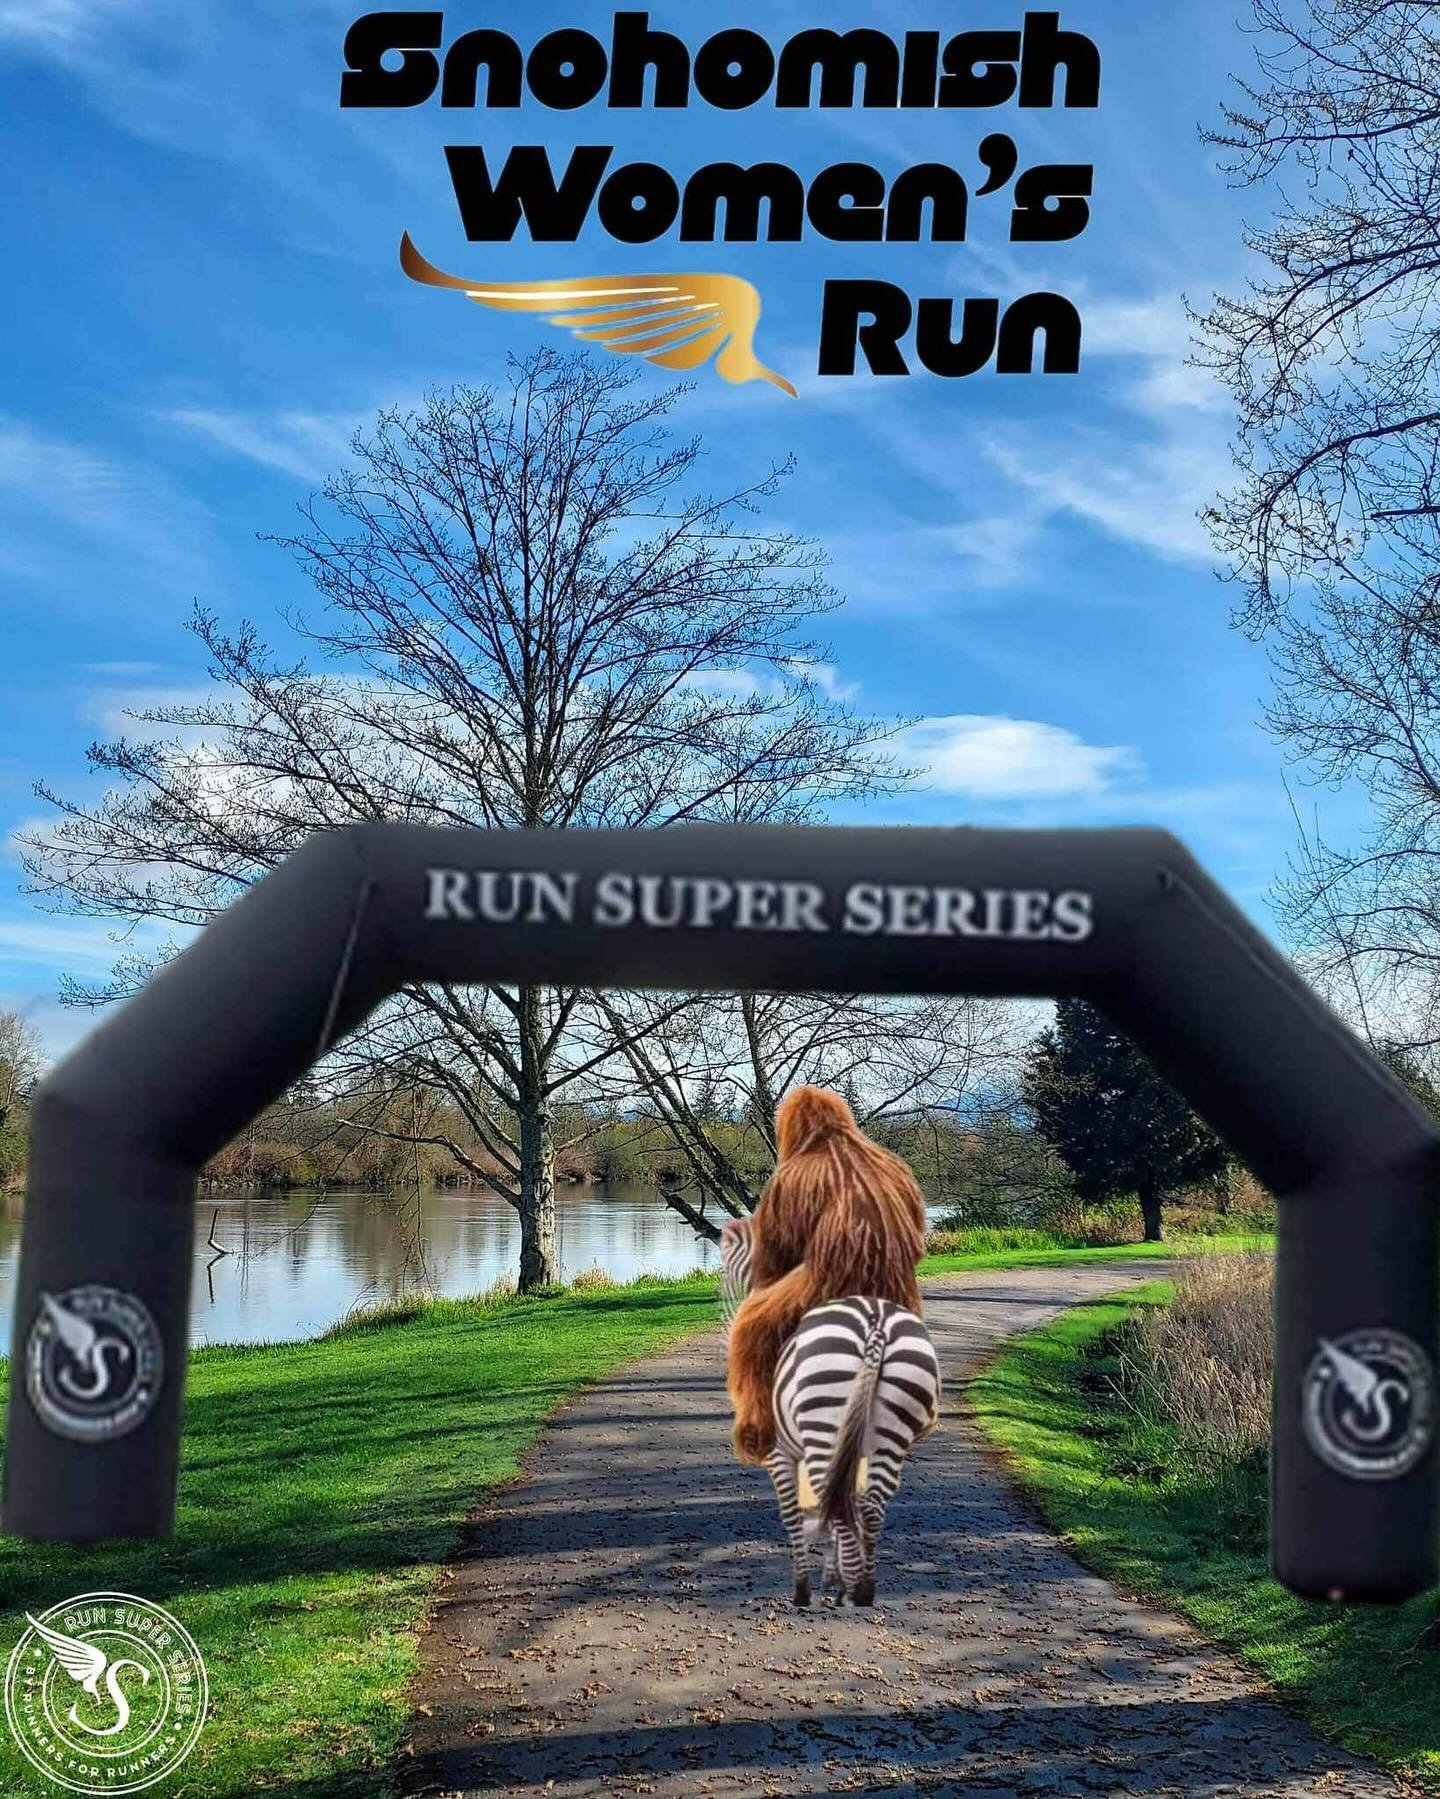 See you all this weekend at the Snohomish women&rsquo;s run